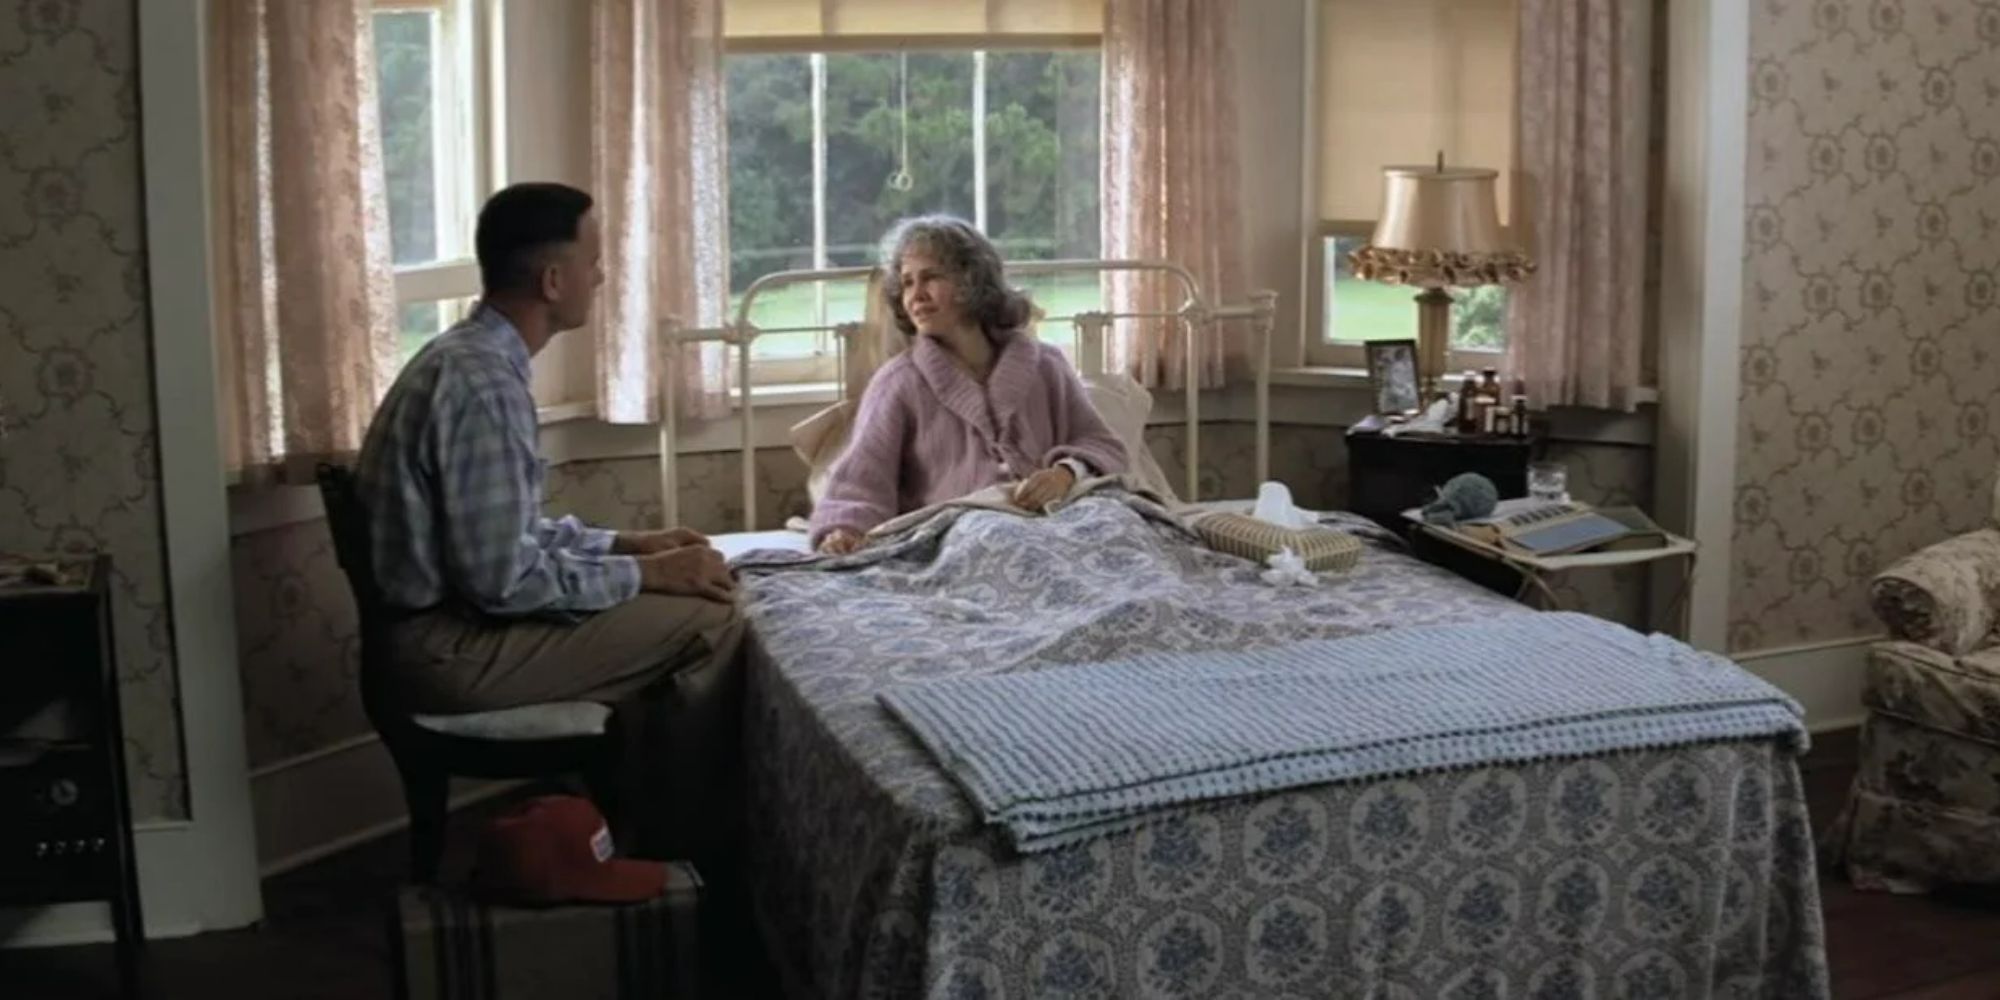 Forrest-Gump talking to his mother in bed